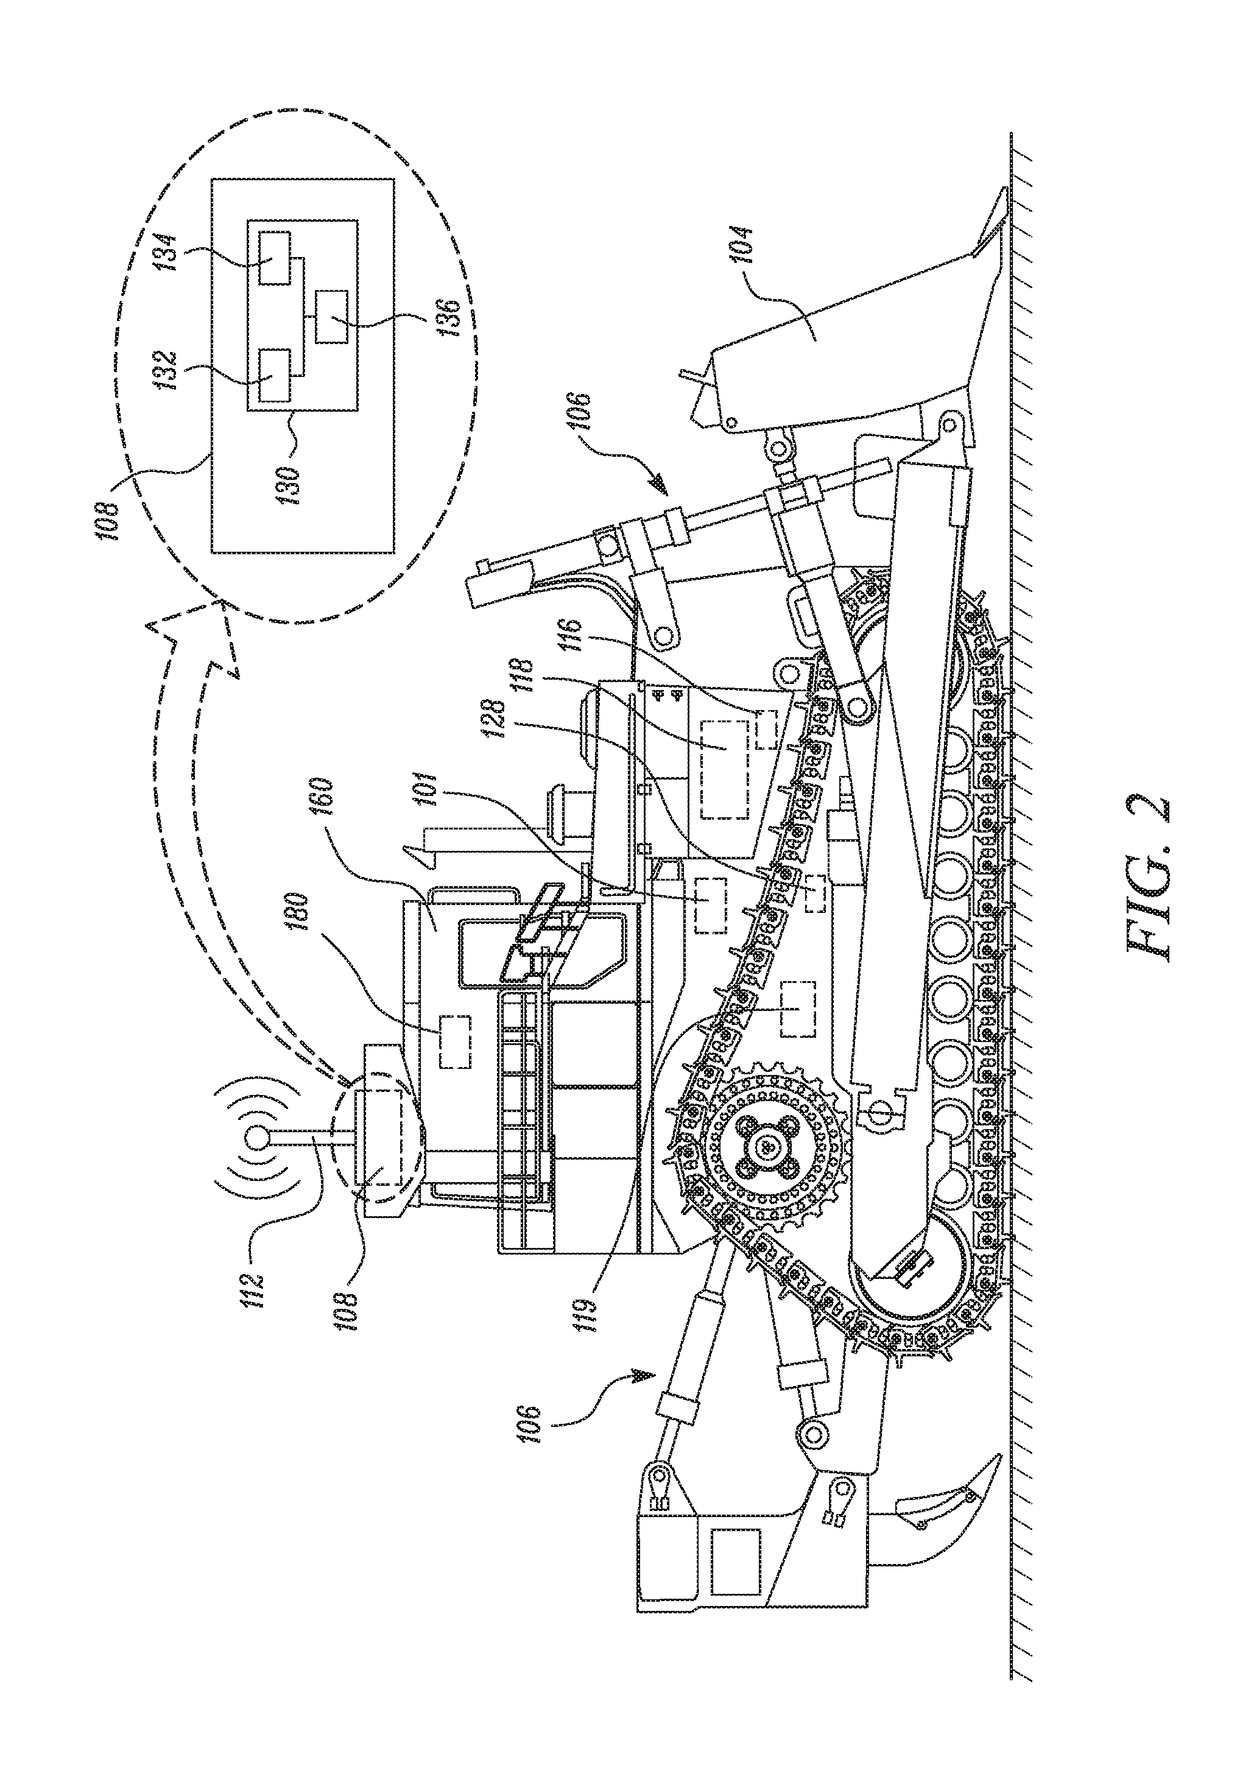 Systems and methods for pile spacing